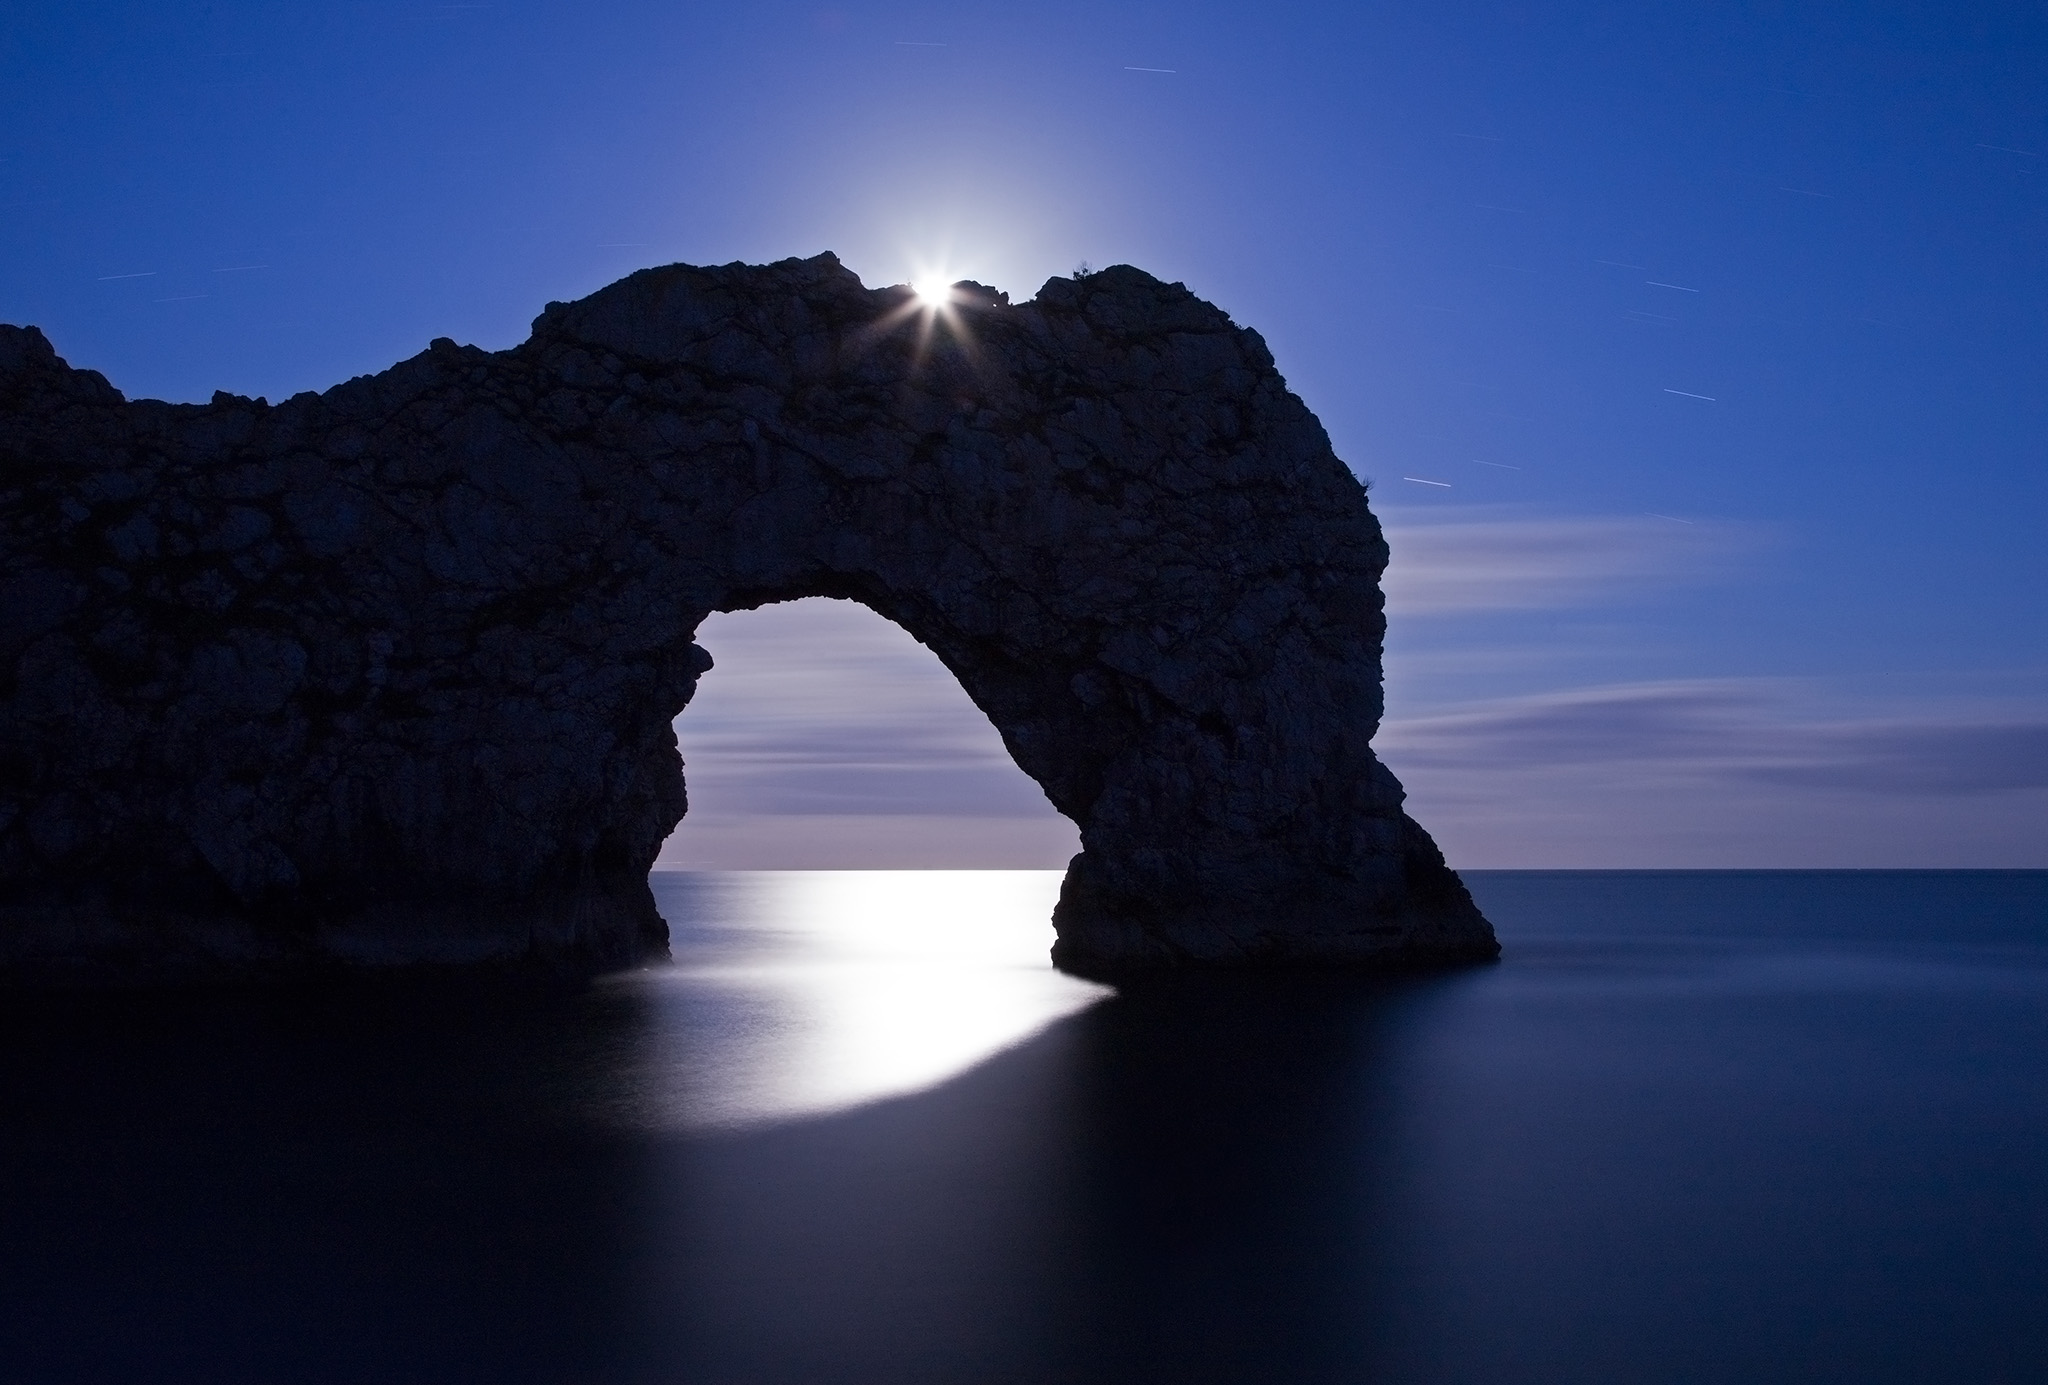 Durdle Door in the moonlight, Dorset, England. Captured late evening as the moonlight flooded through the rock's archway. The long exposure has also produced some nice star trails to the right of the arch. Durdle door is one of the many stunning locations to visit on the Jurassic coast in southern England.